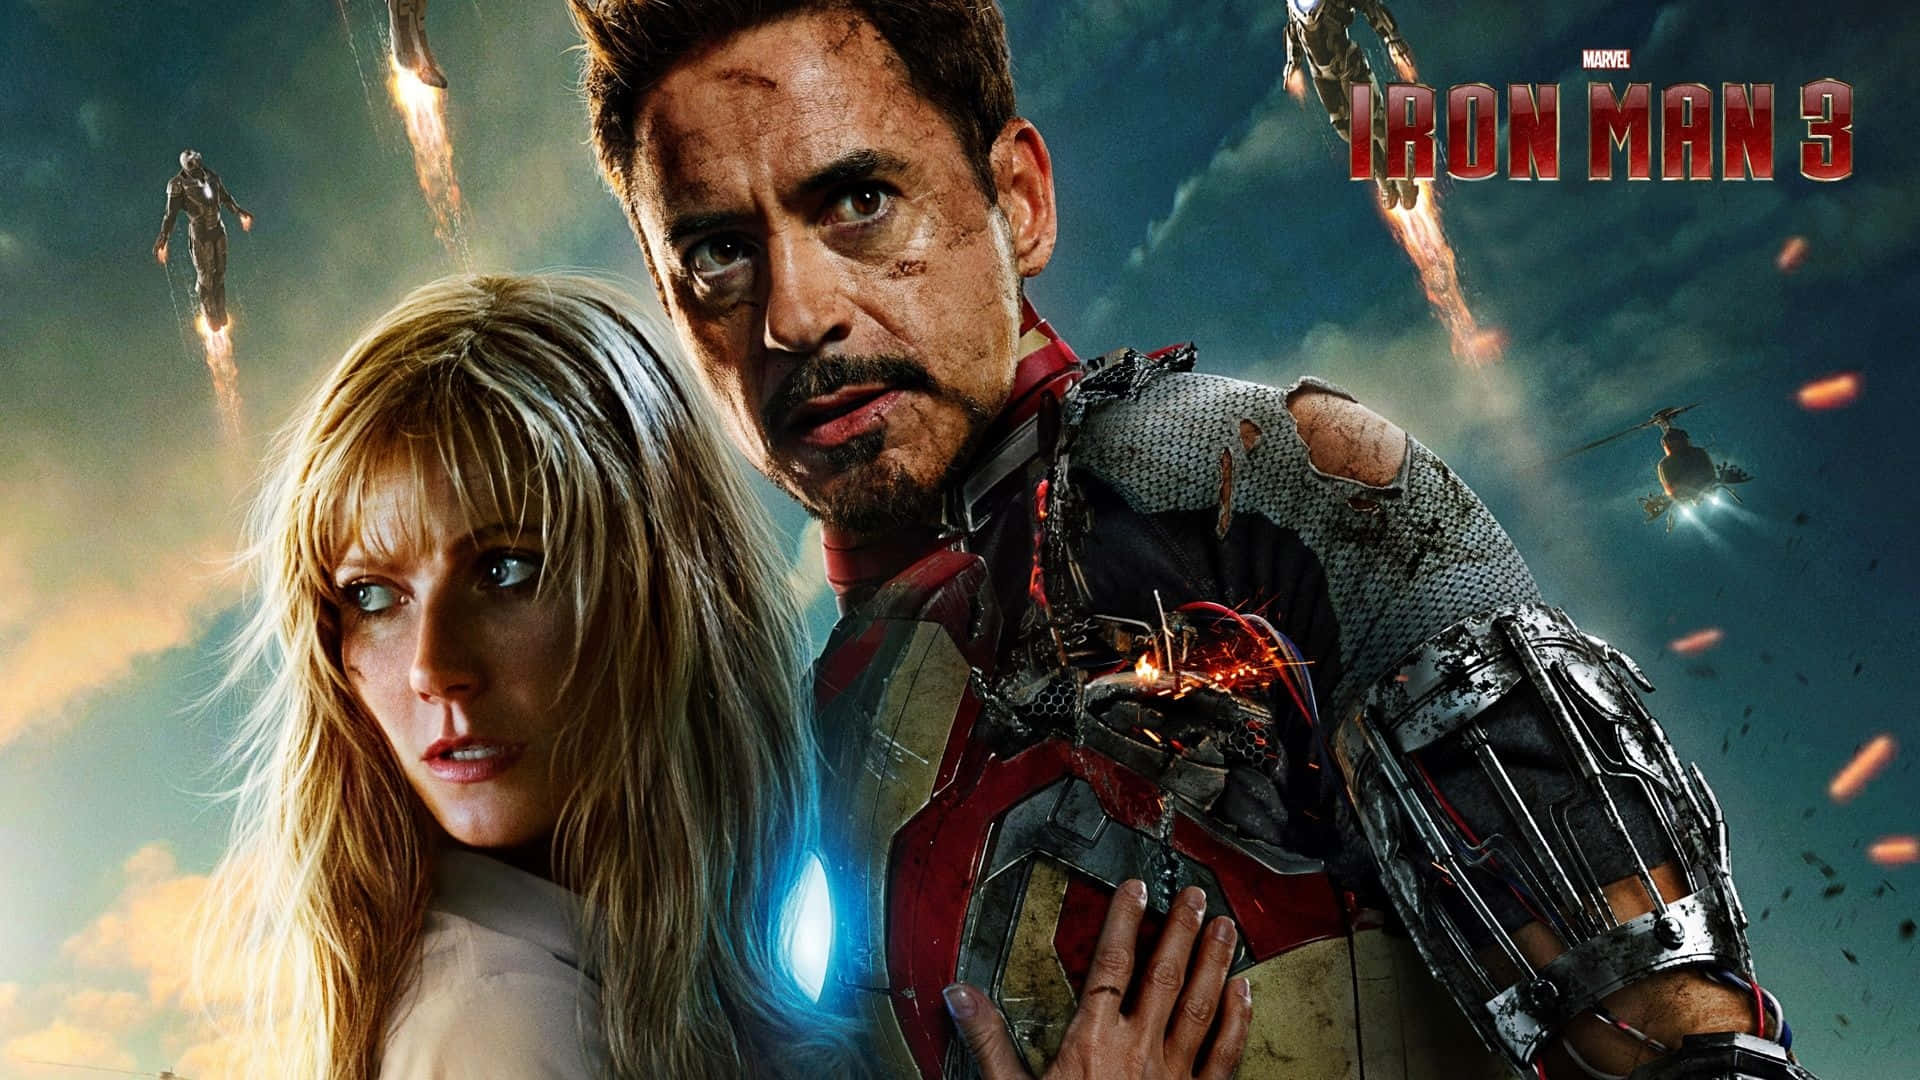 Iron Man 3 – The Powerful Conclusion To Tony Stark's Story Background